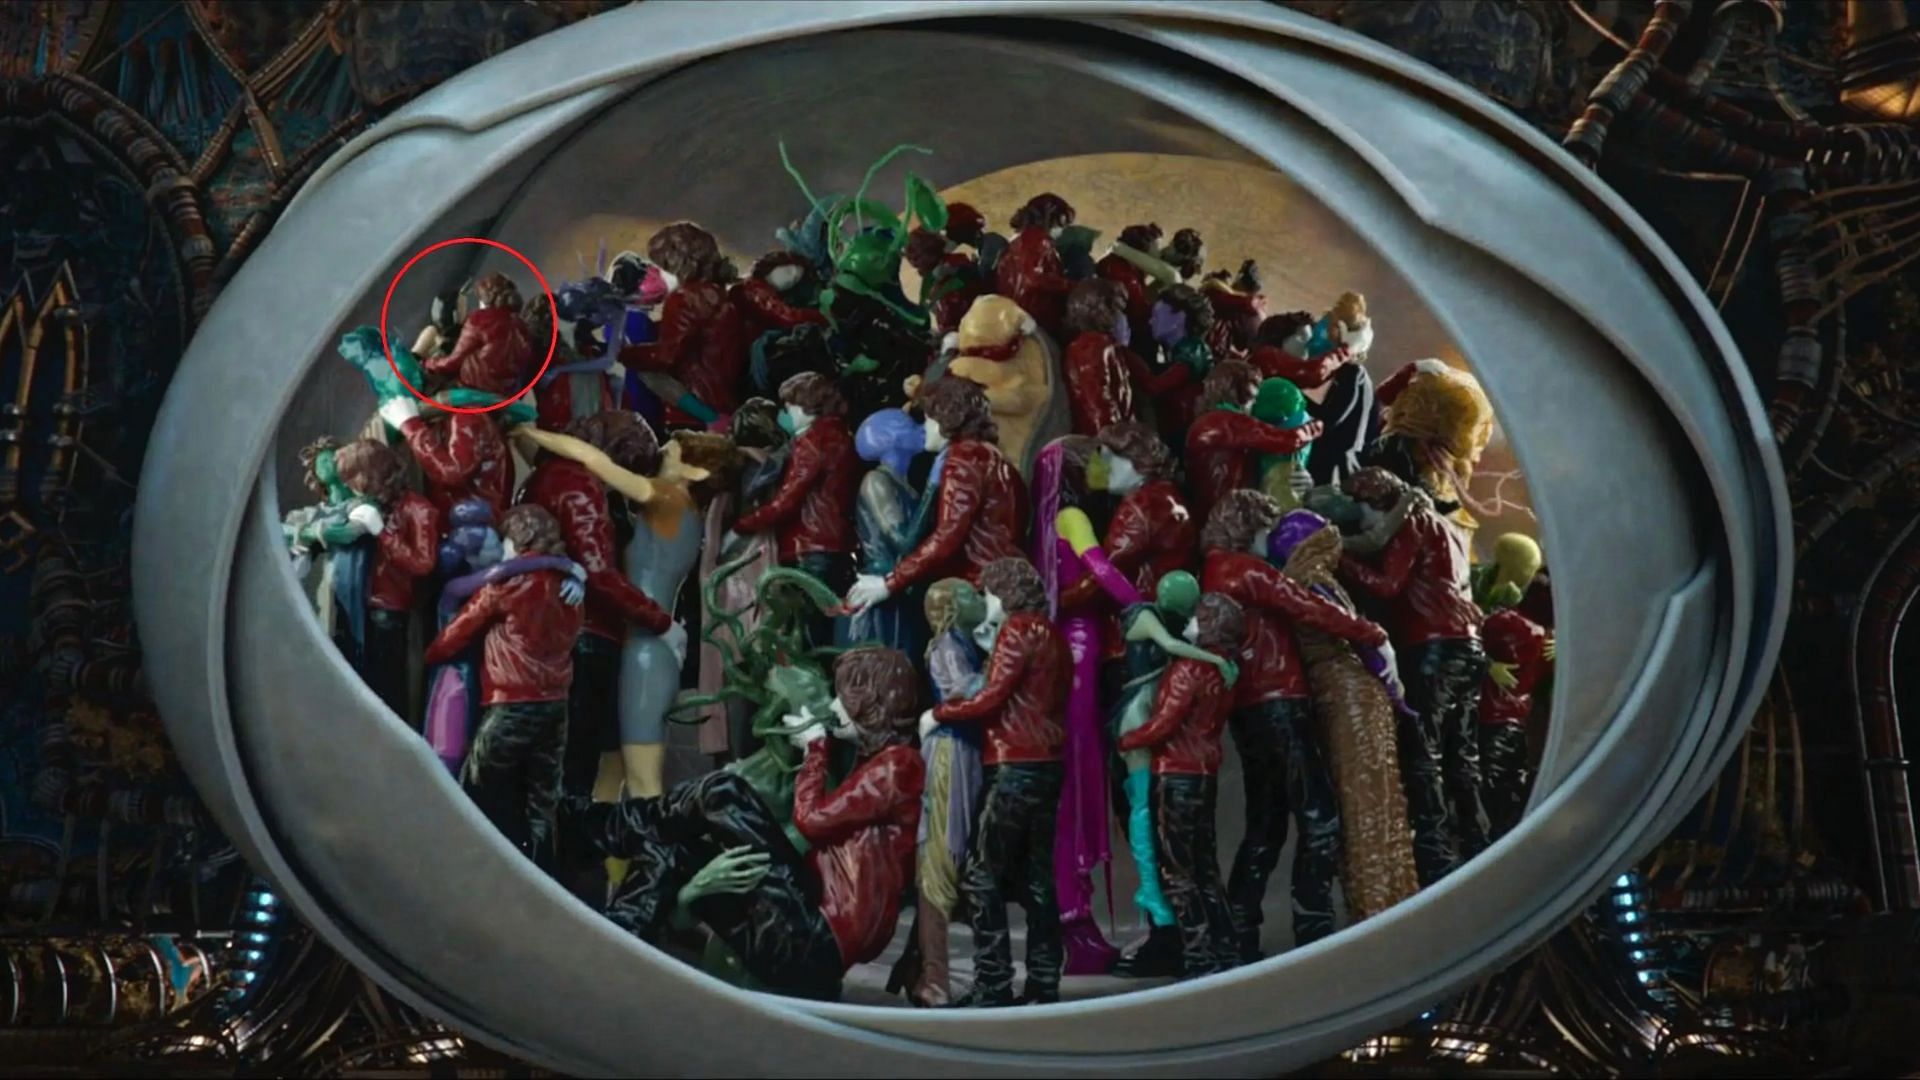 Ego with different life forms (Screengrab: Guardians of the Galaxy Vol. 2 via Marvel Studios)